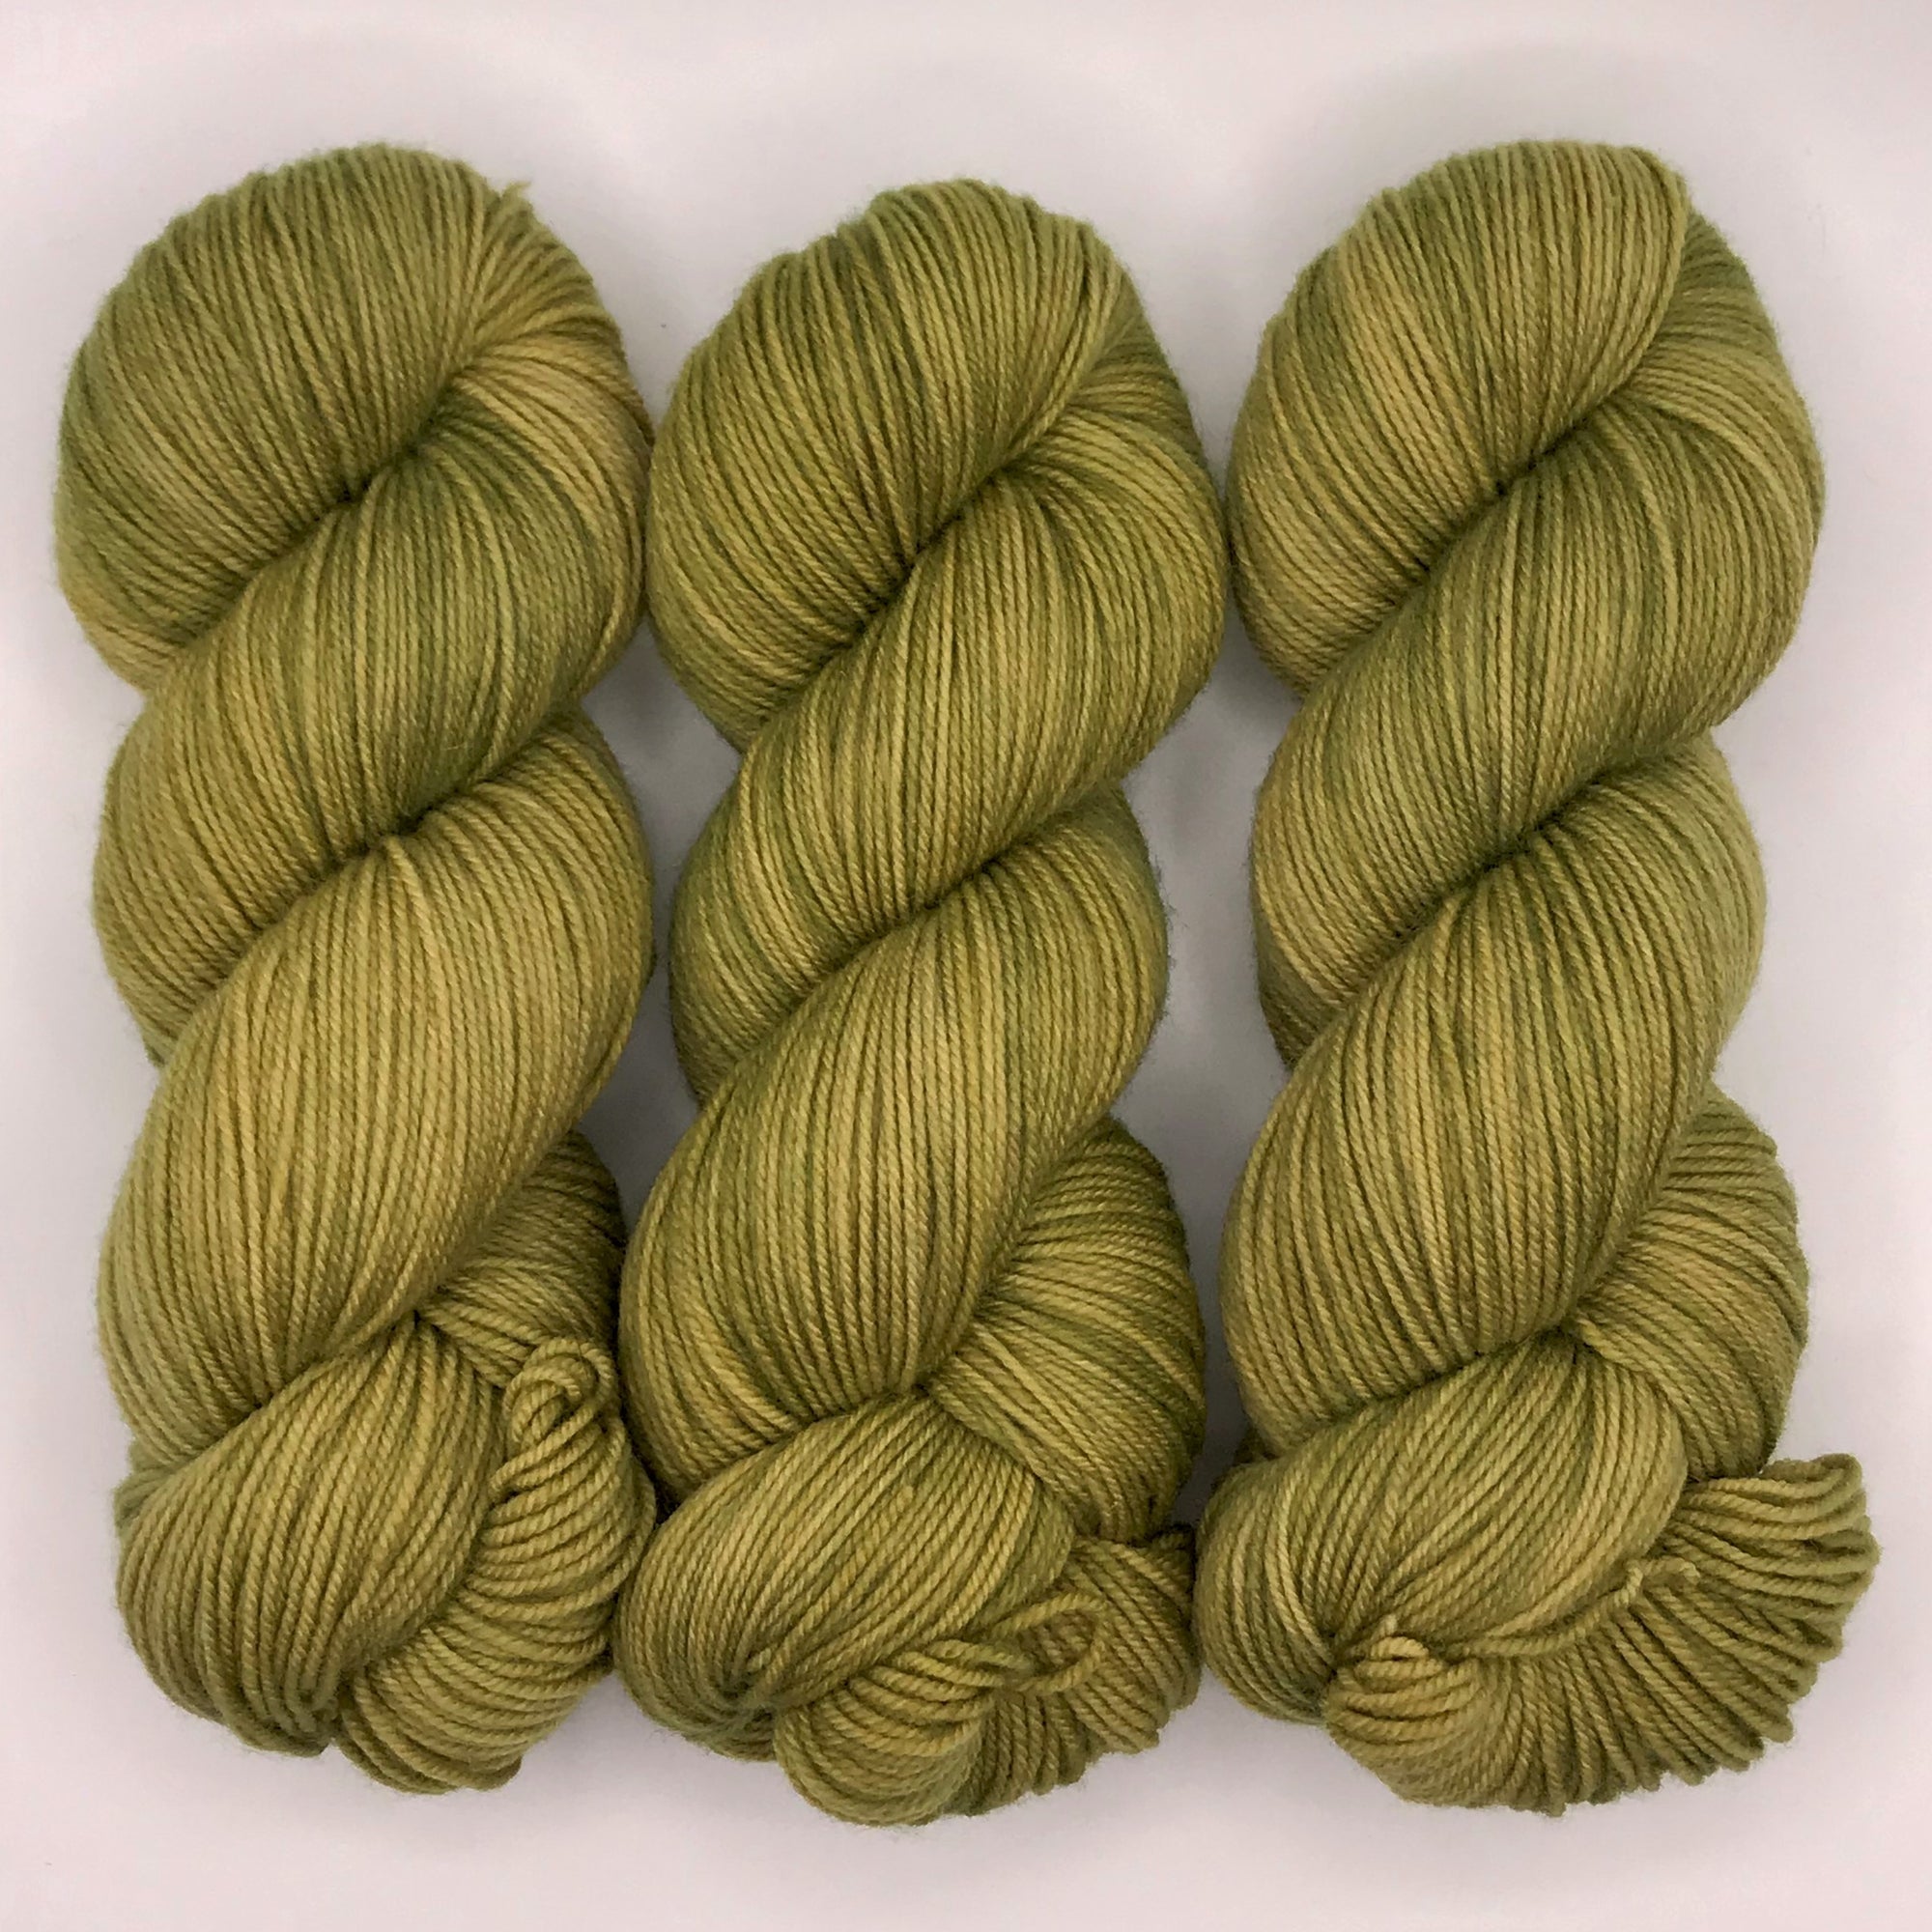 Anjou - Revival Worsted - Dyed Stock